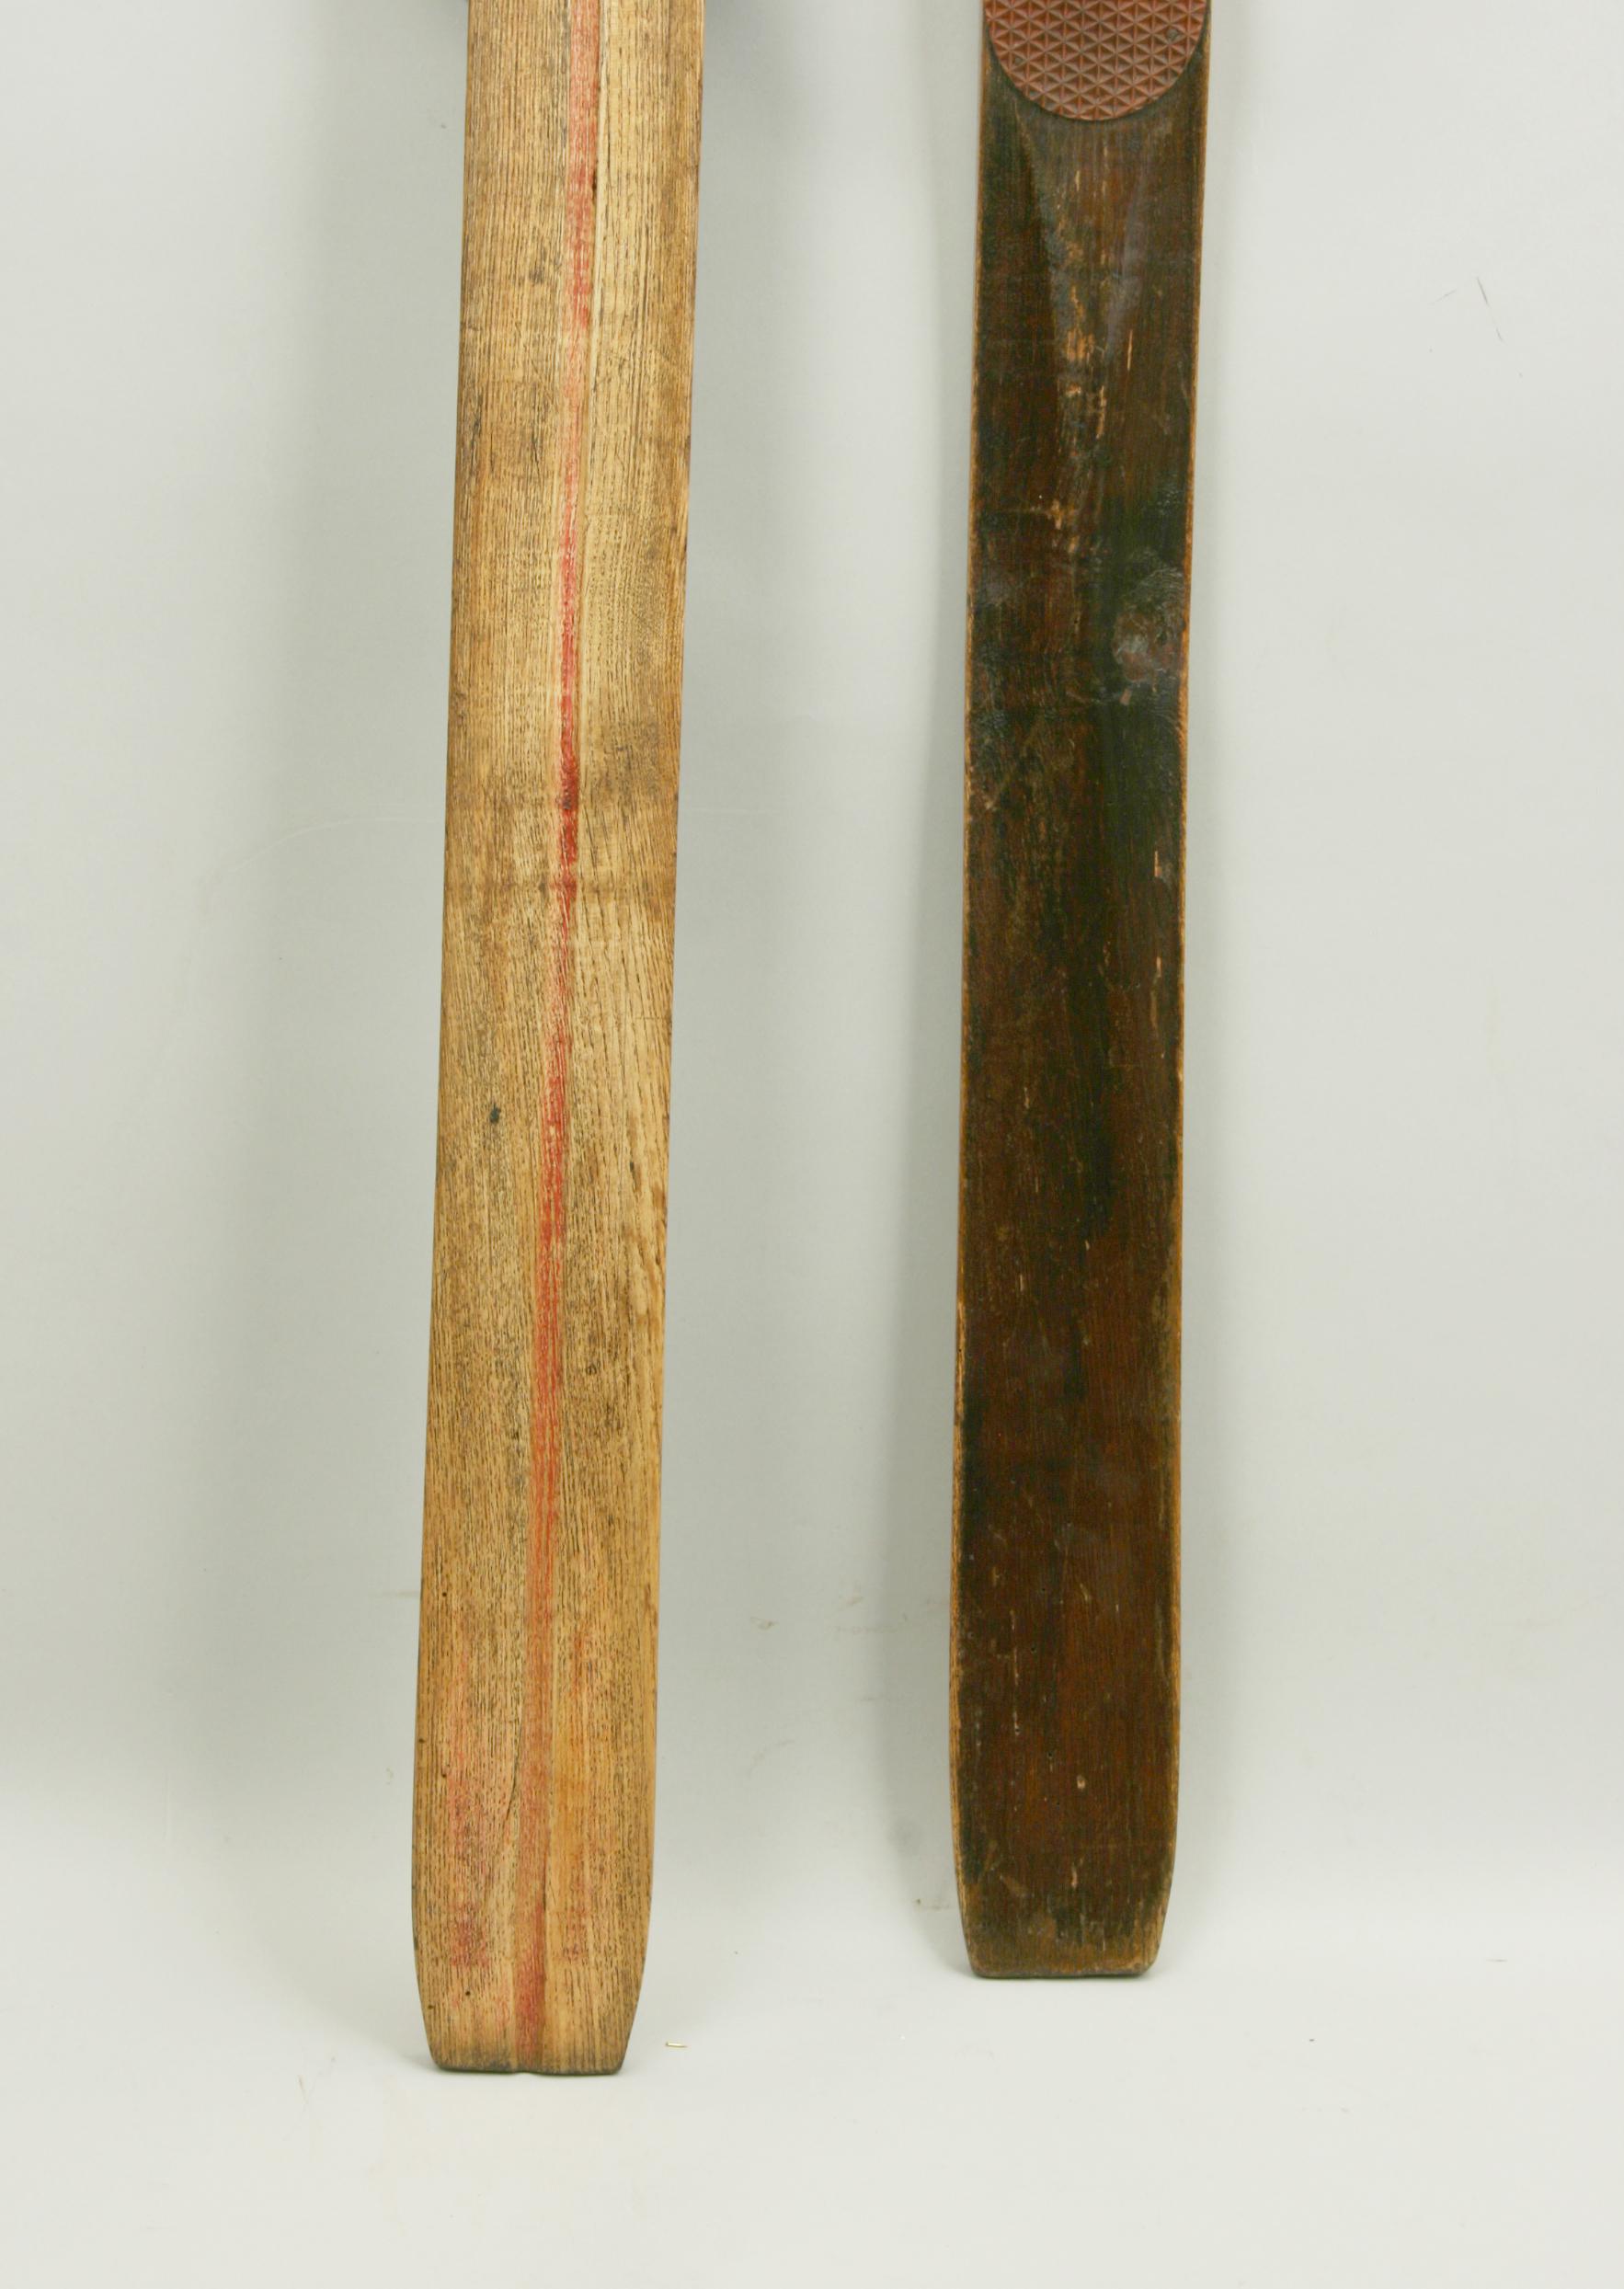 Antique Ash Skis with Unique Oberhof Safety Bindings, Museum Piece 3